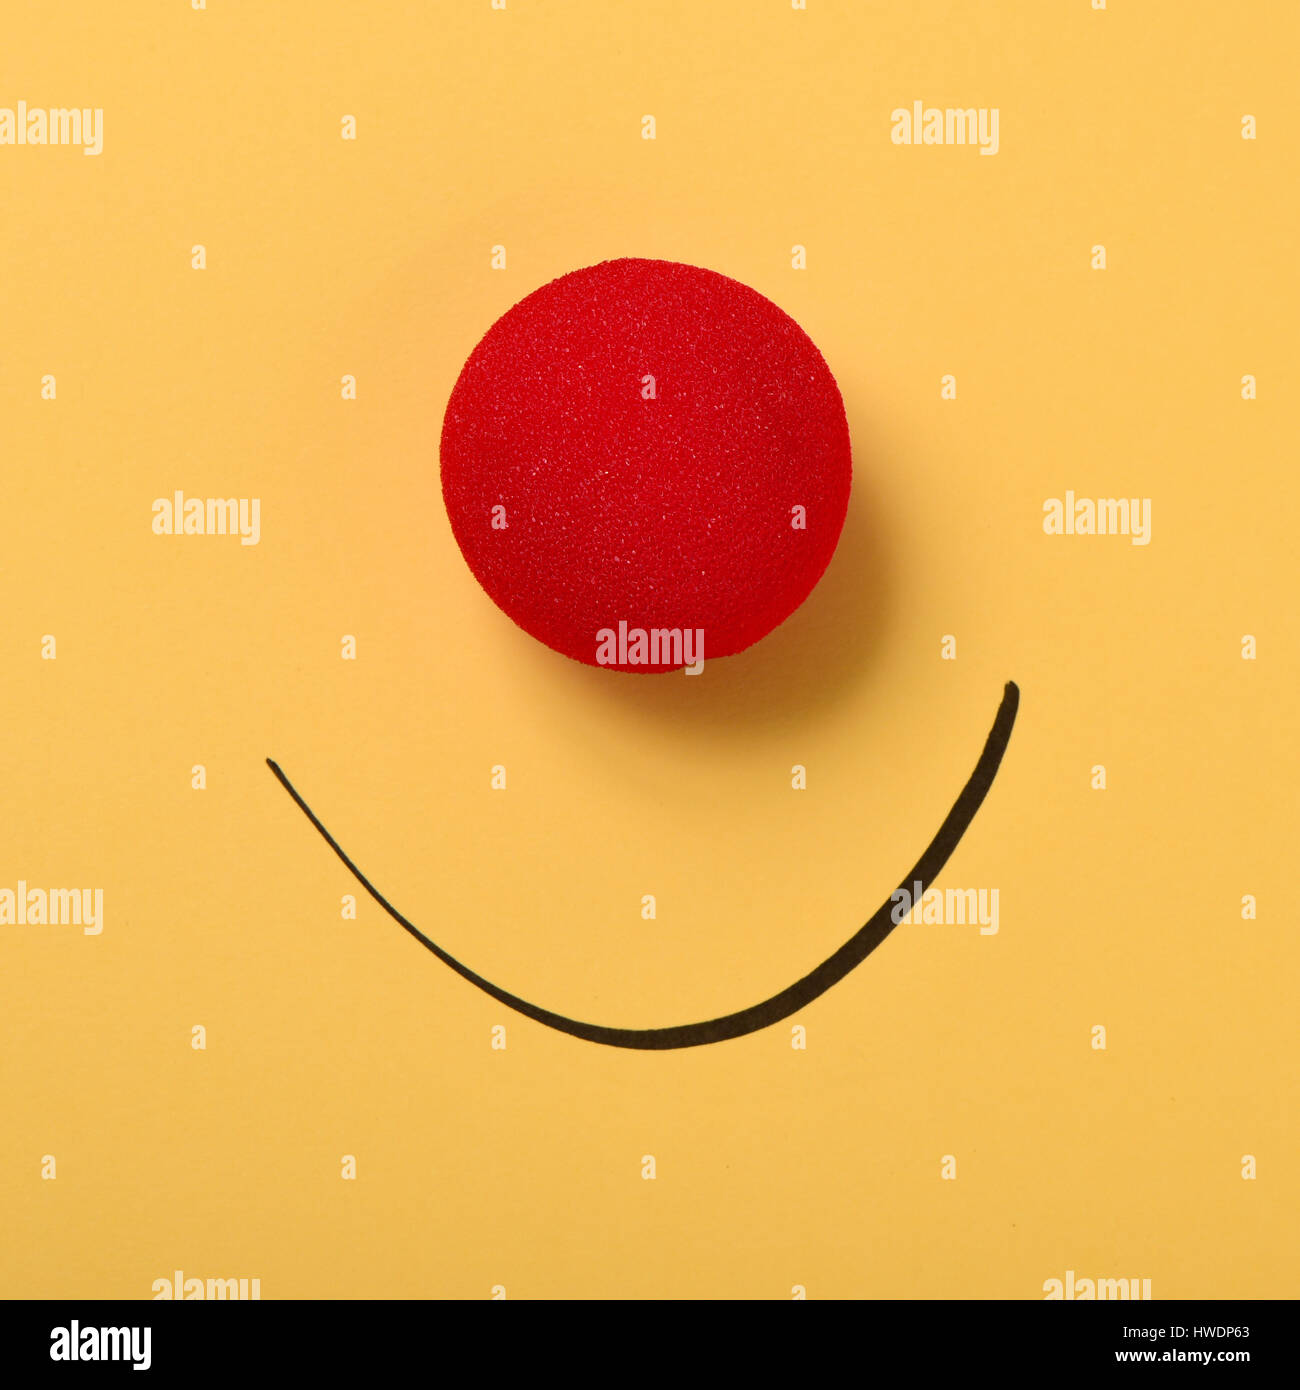 a red clown nose and a smile drawn on a yellow background Stock Photo